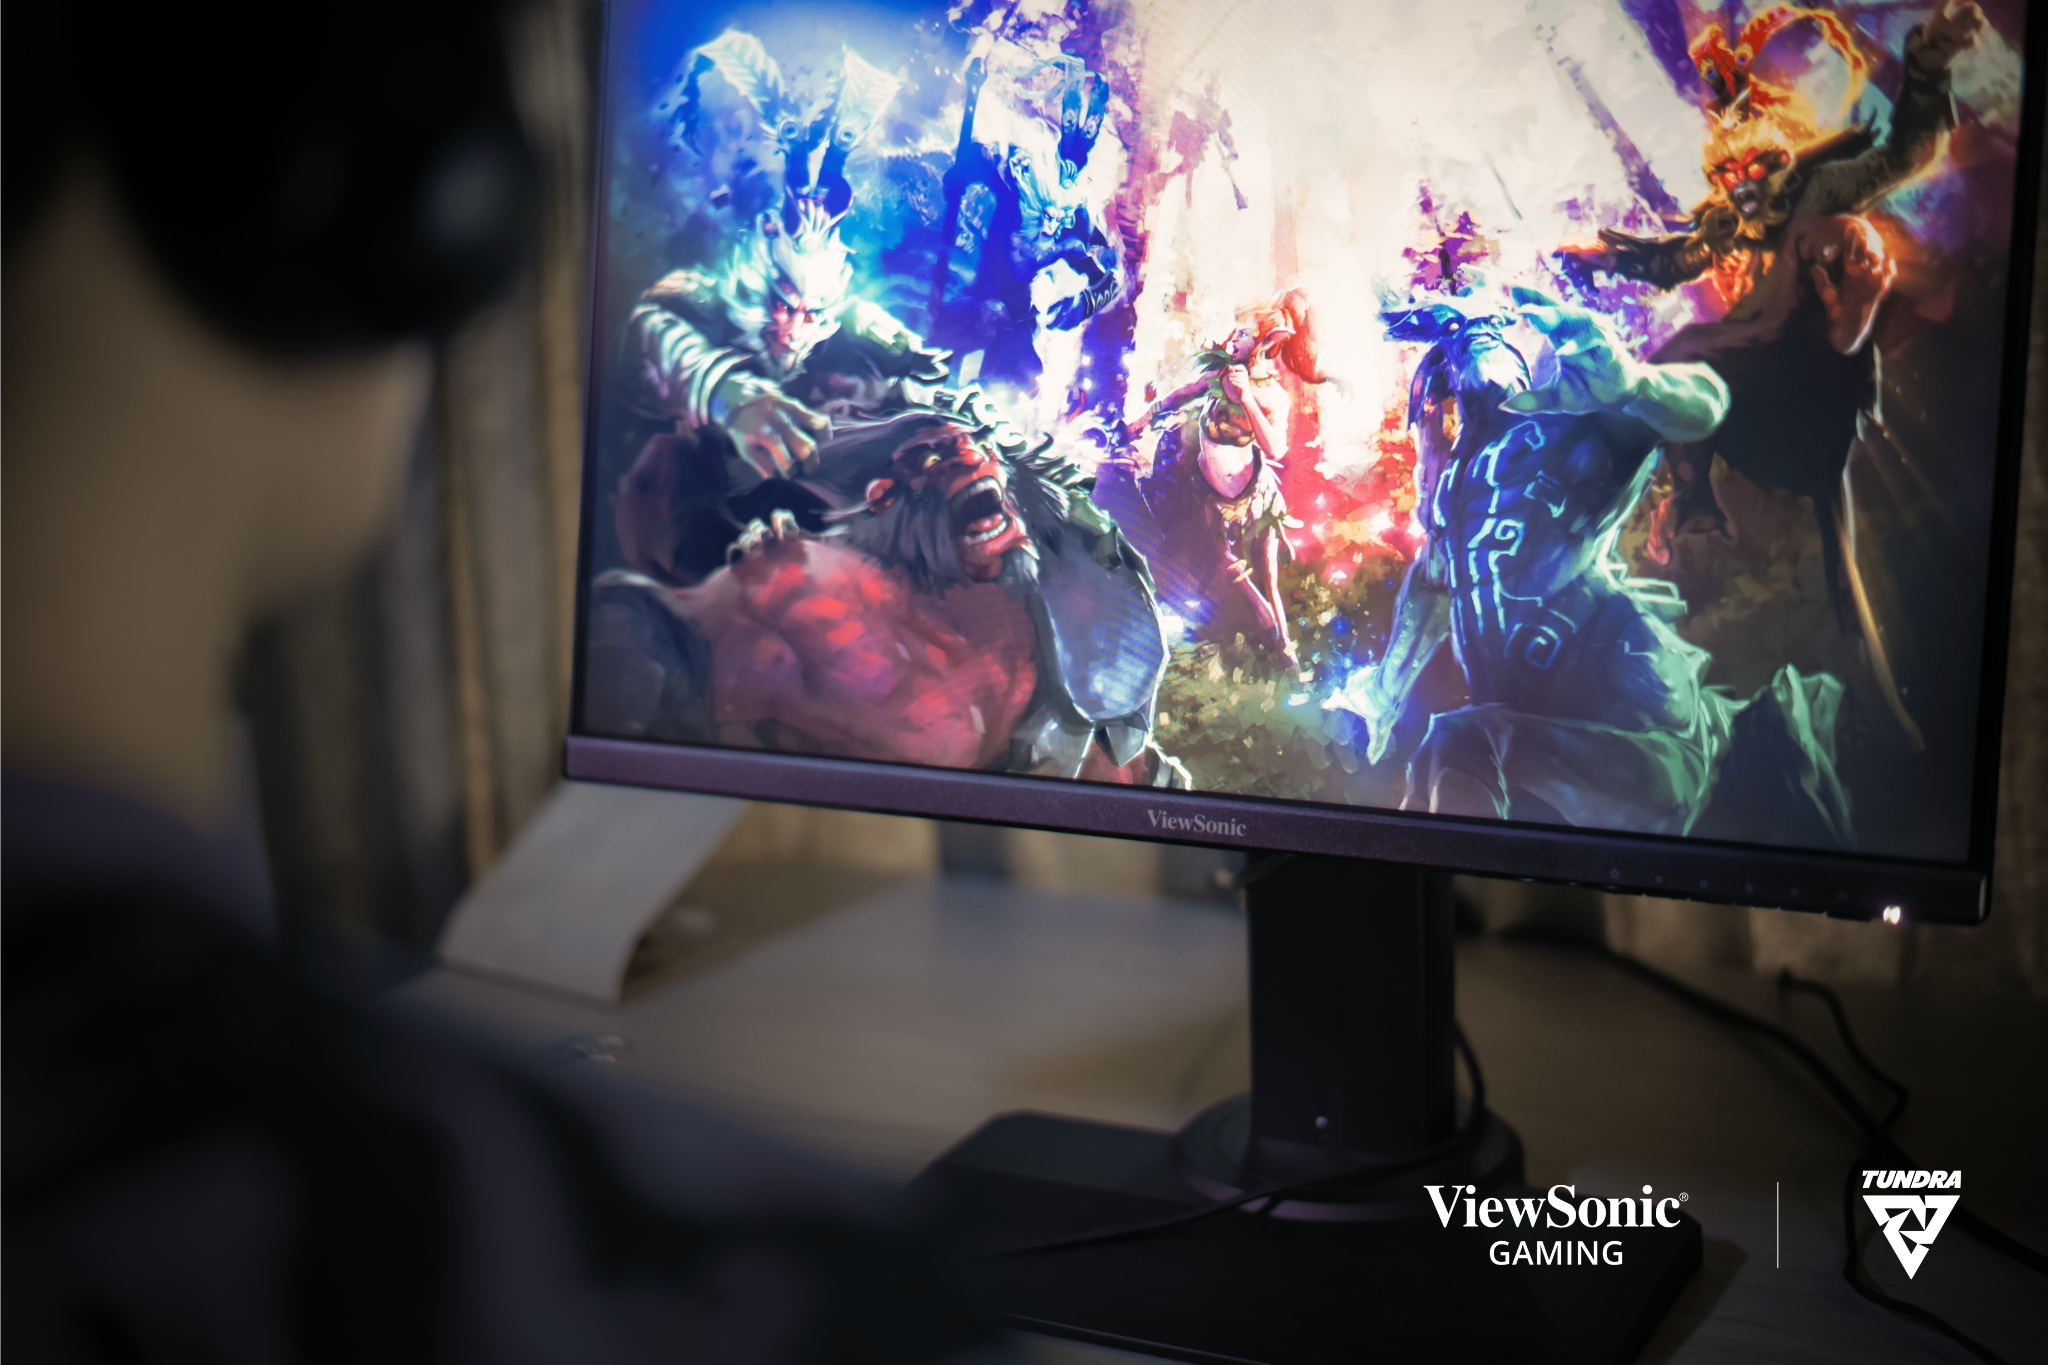 ViewSonic partners with Tundra Esports as its Official Supplier during The International 2023.